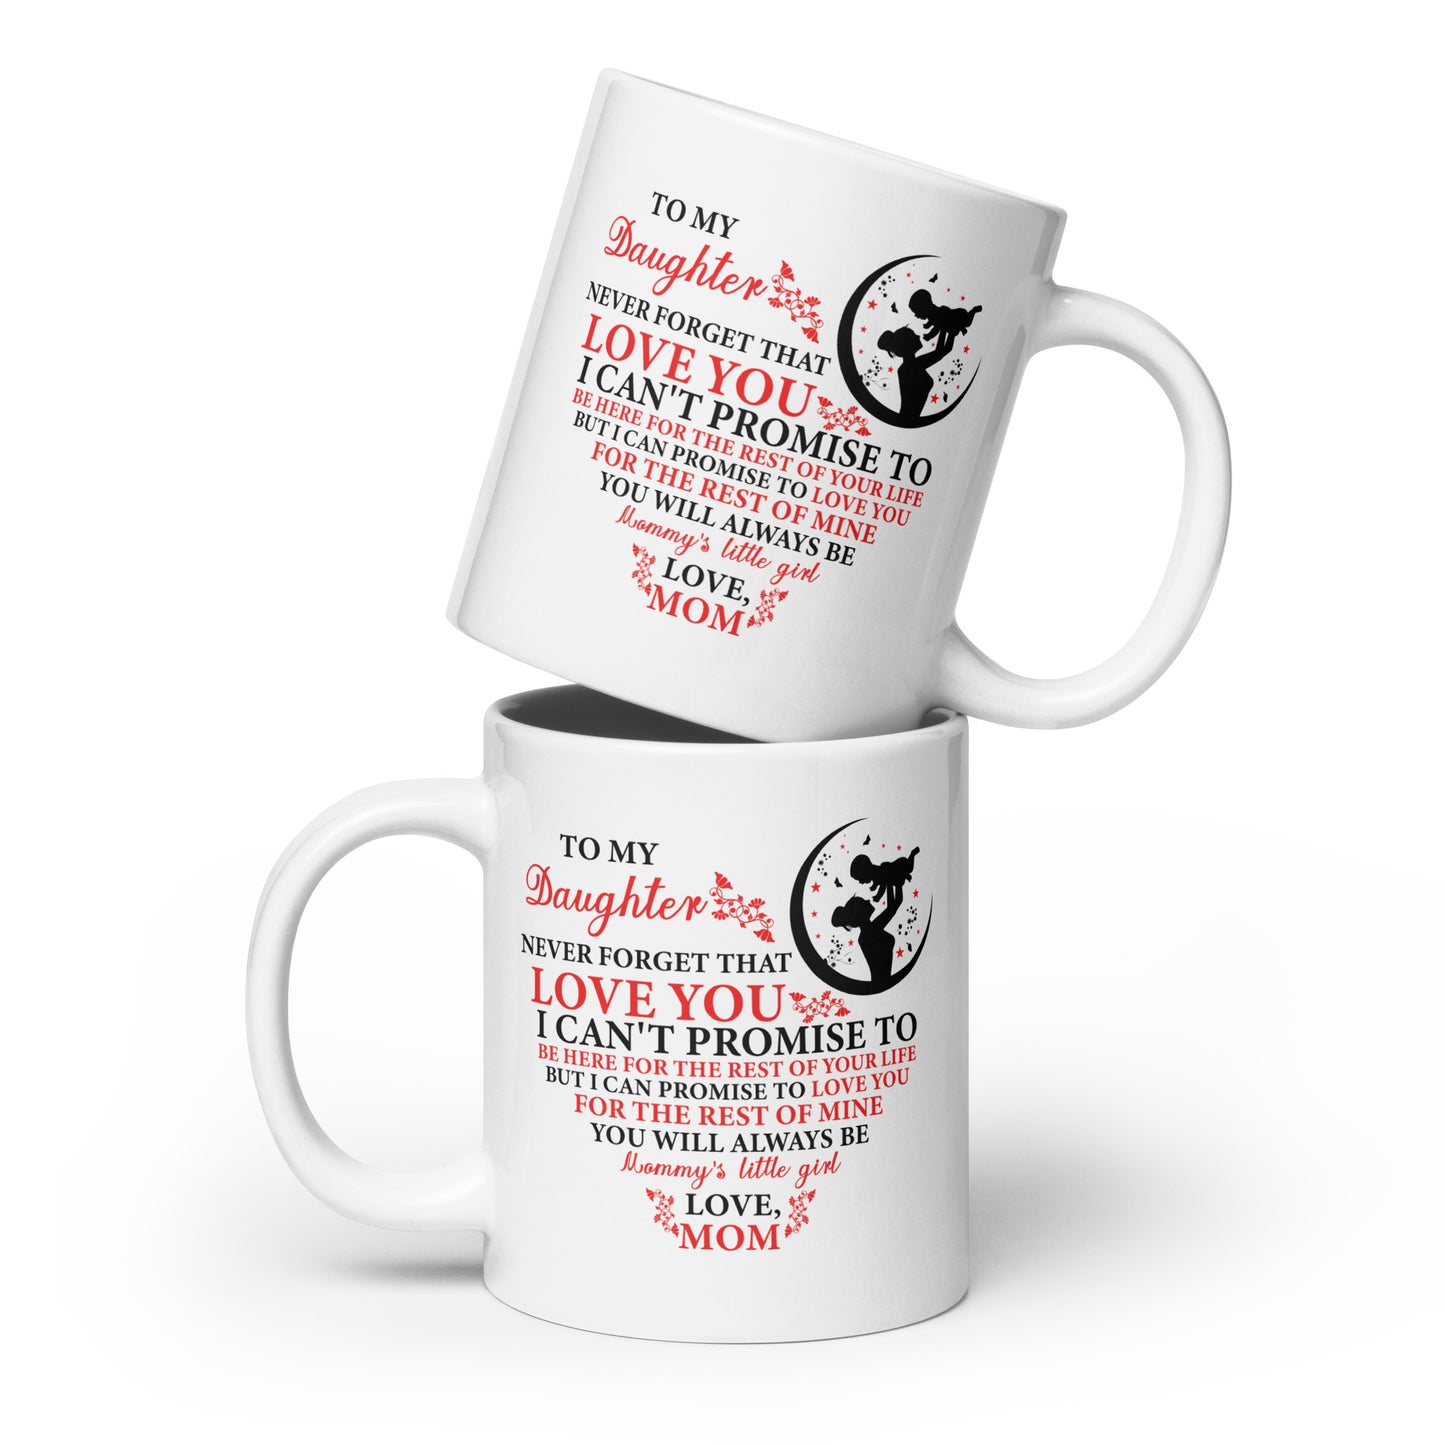 To my Daughter Never forget that Personalized Mug Gift Customized Mug Gift w Heartfelt Message